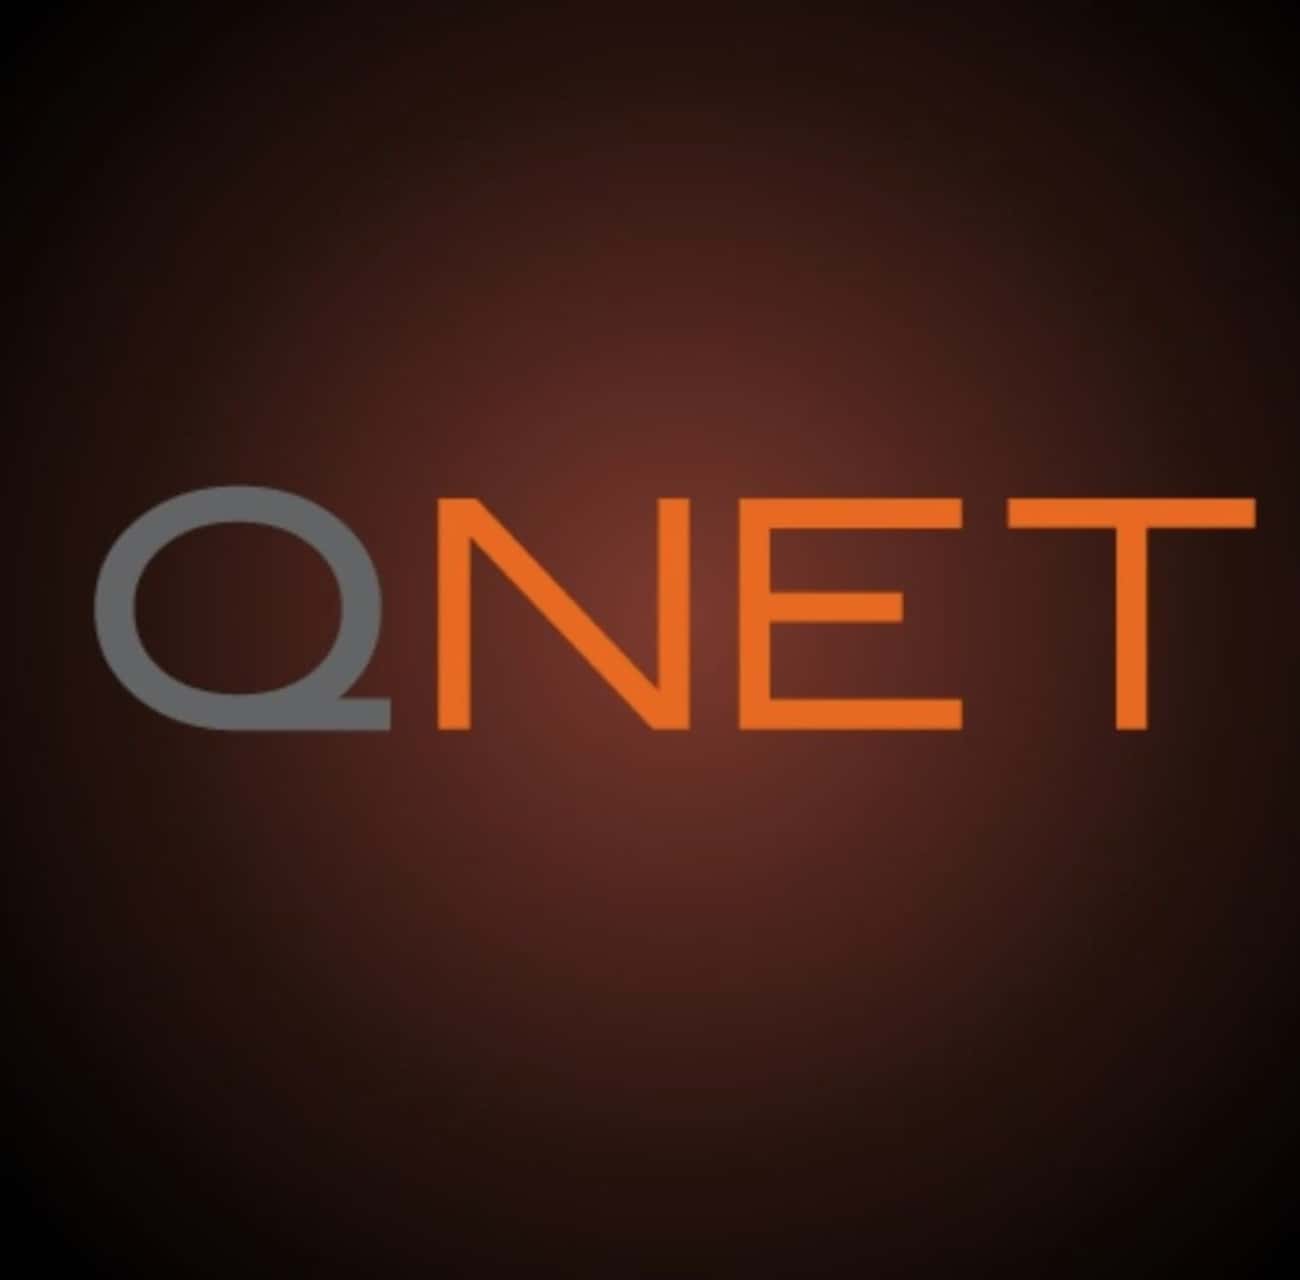 Qnet Watches